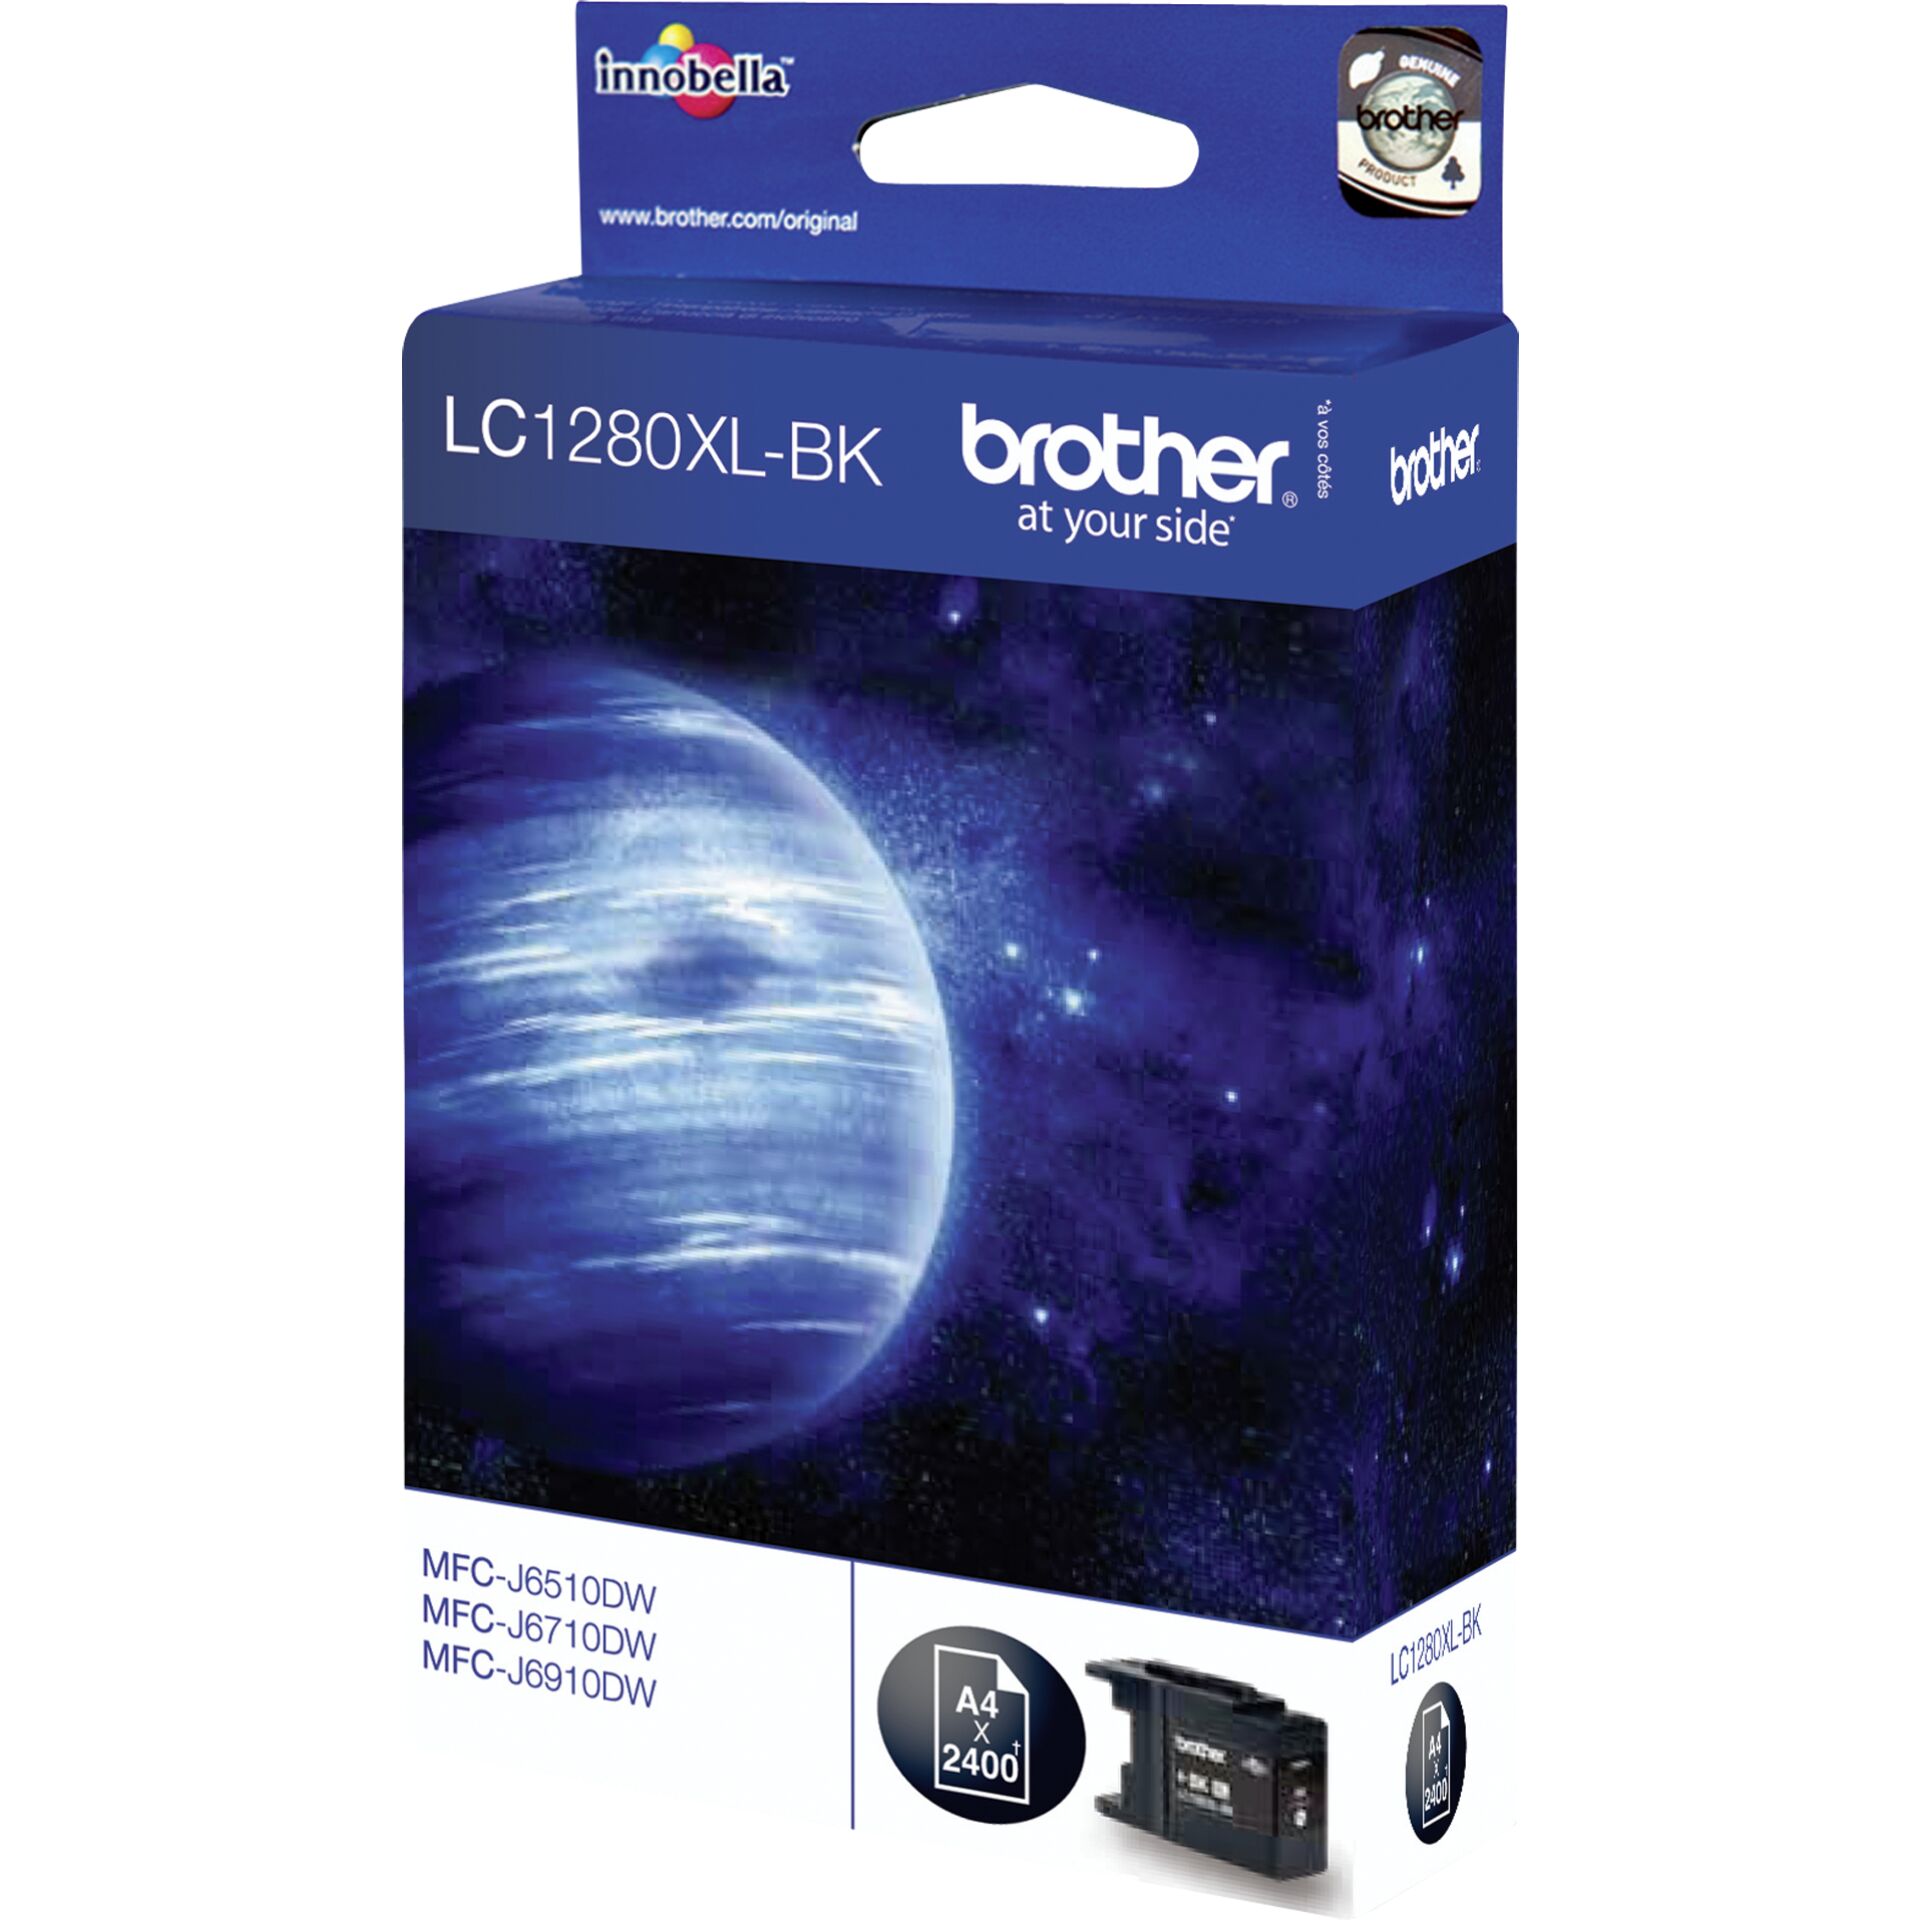 2er-Pack Brother Tinte LC1280XL-BK schwarz (Twin-Pack) 